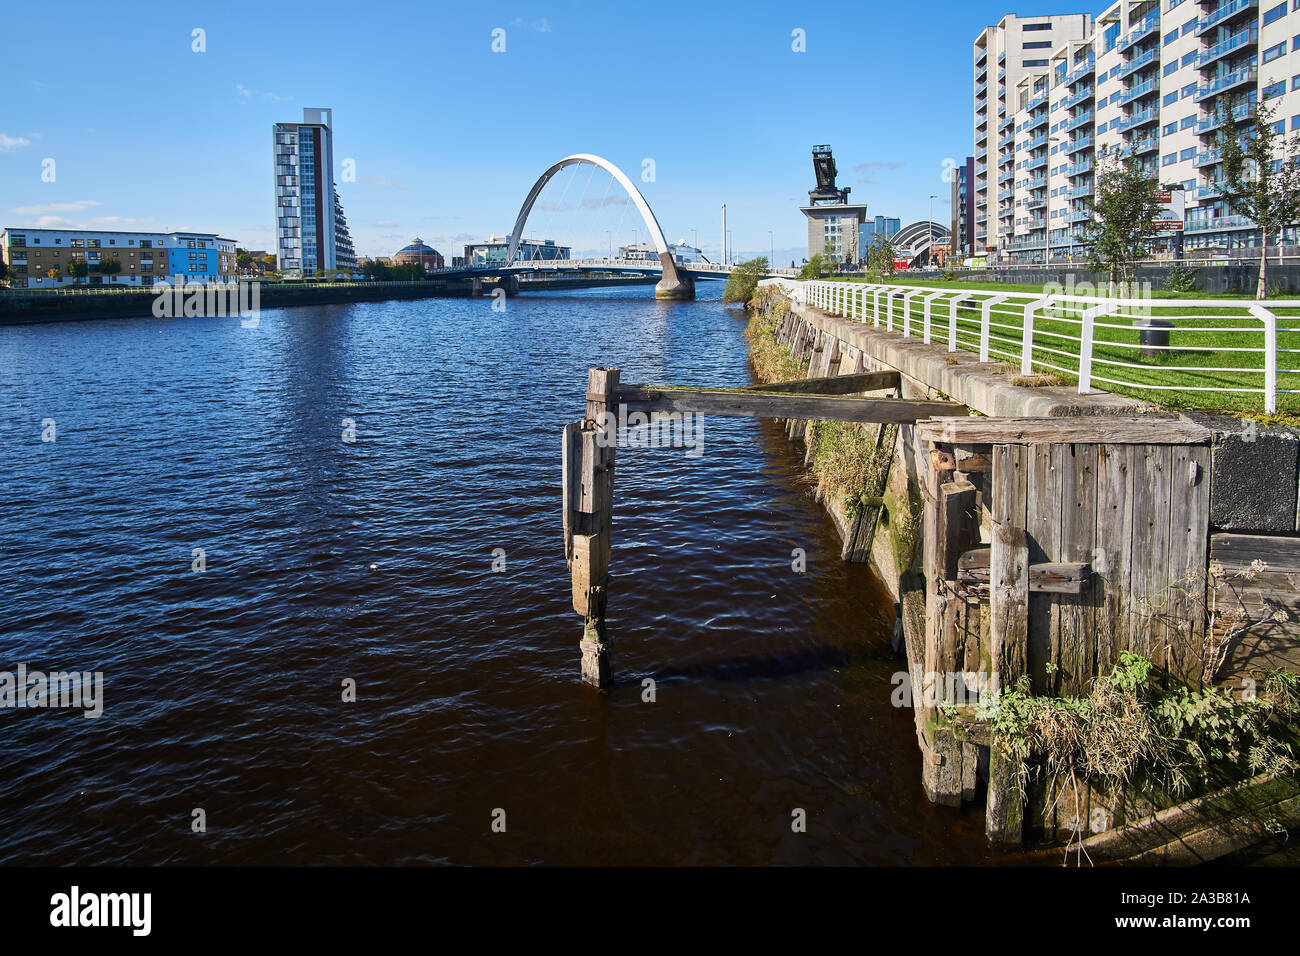 A view towards the Squinty broad bridge from the Lancefield Quay in Glasgow, UK Stock Photo